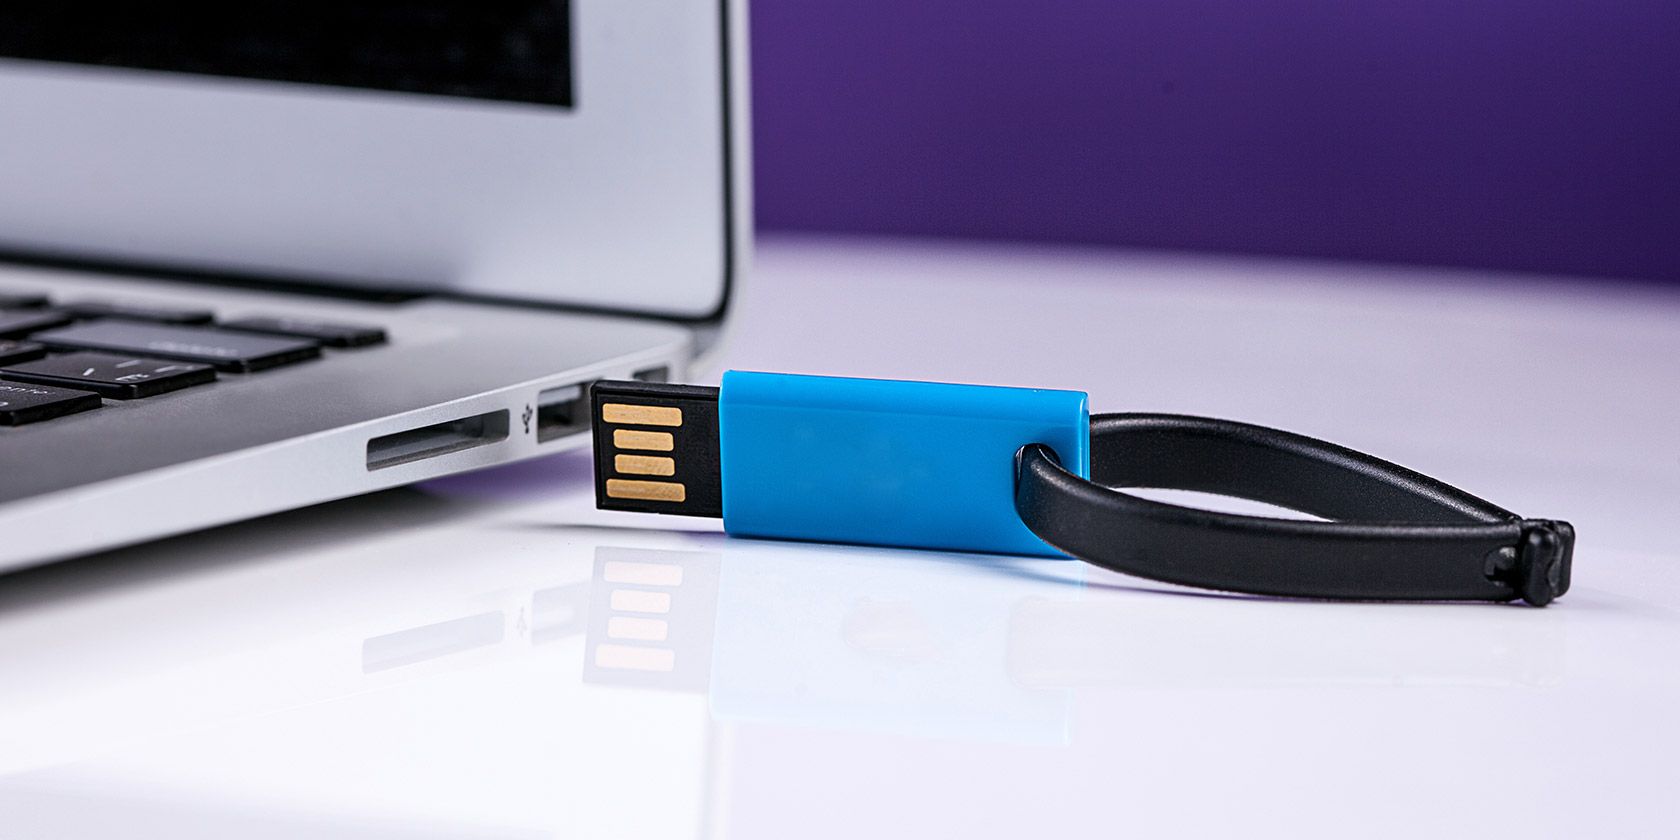 how to recover files from flash drive from broken